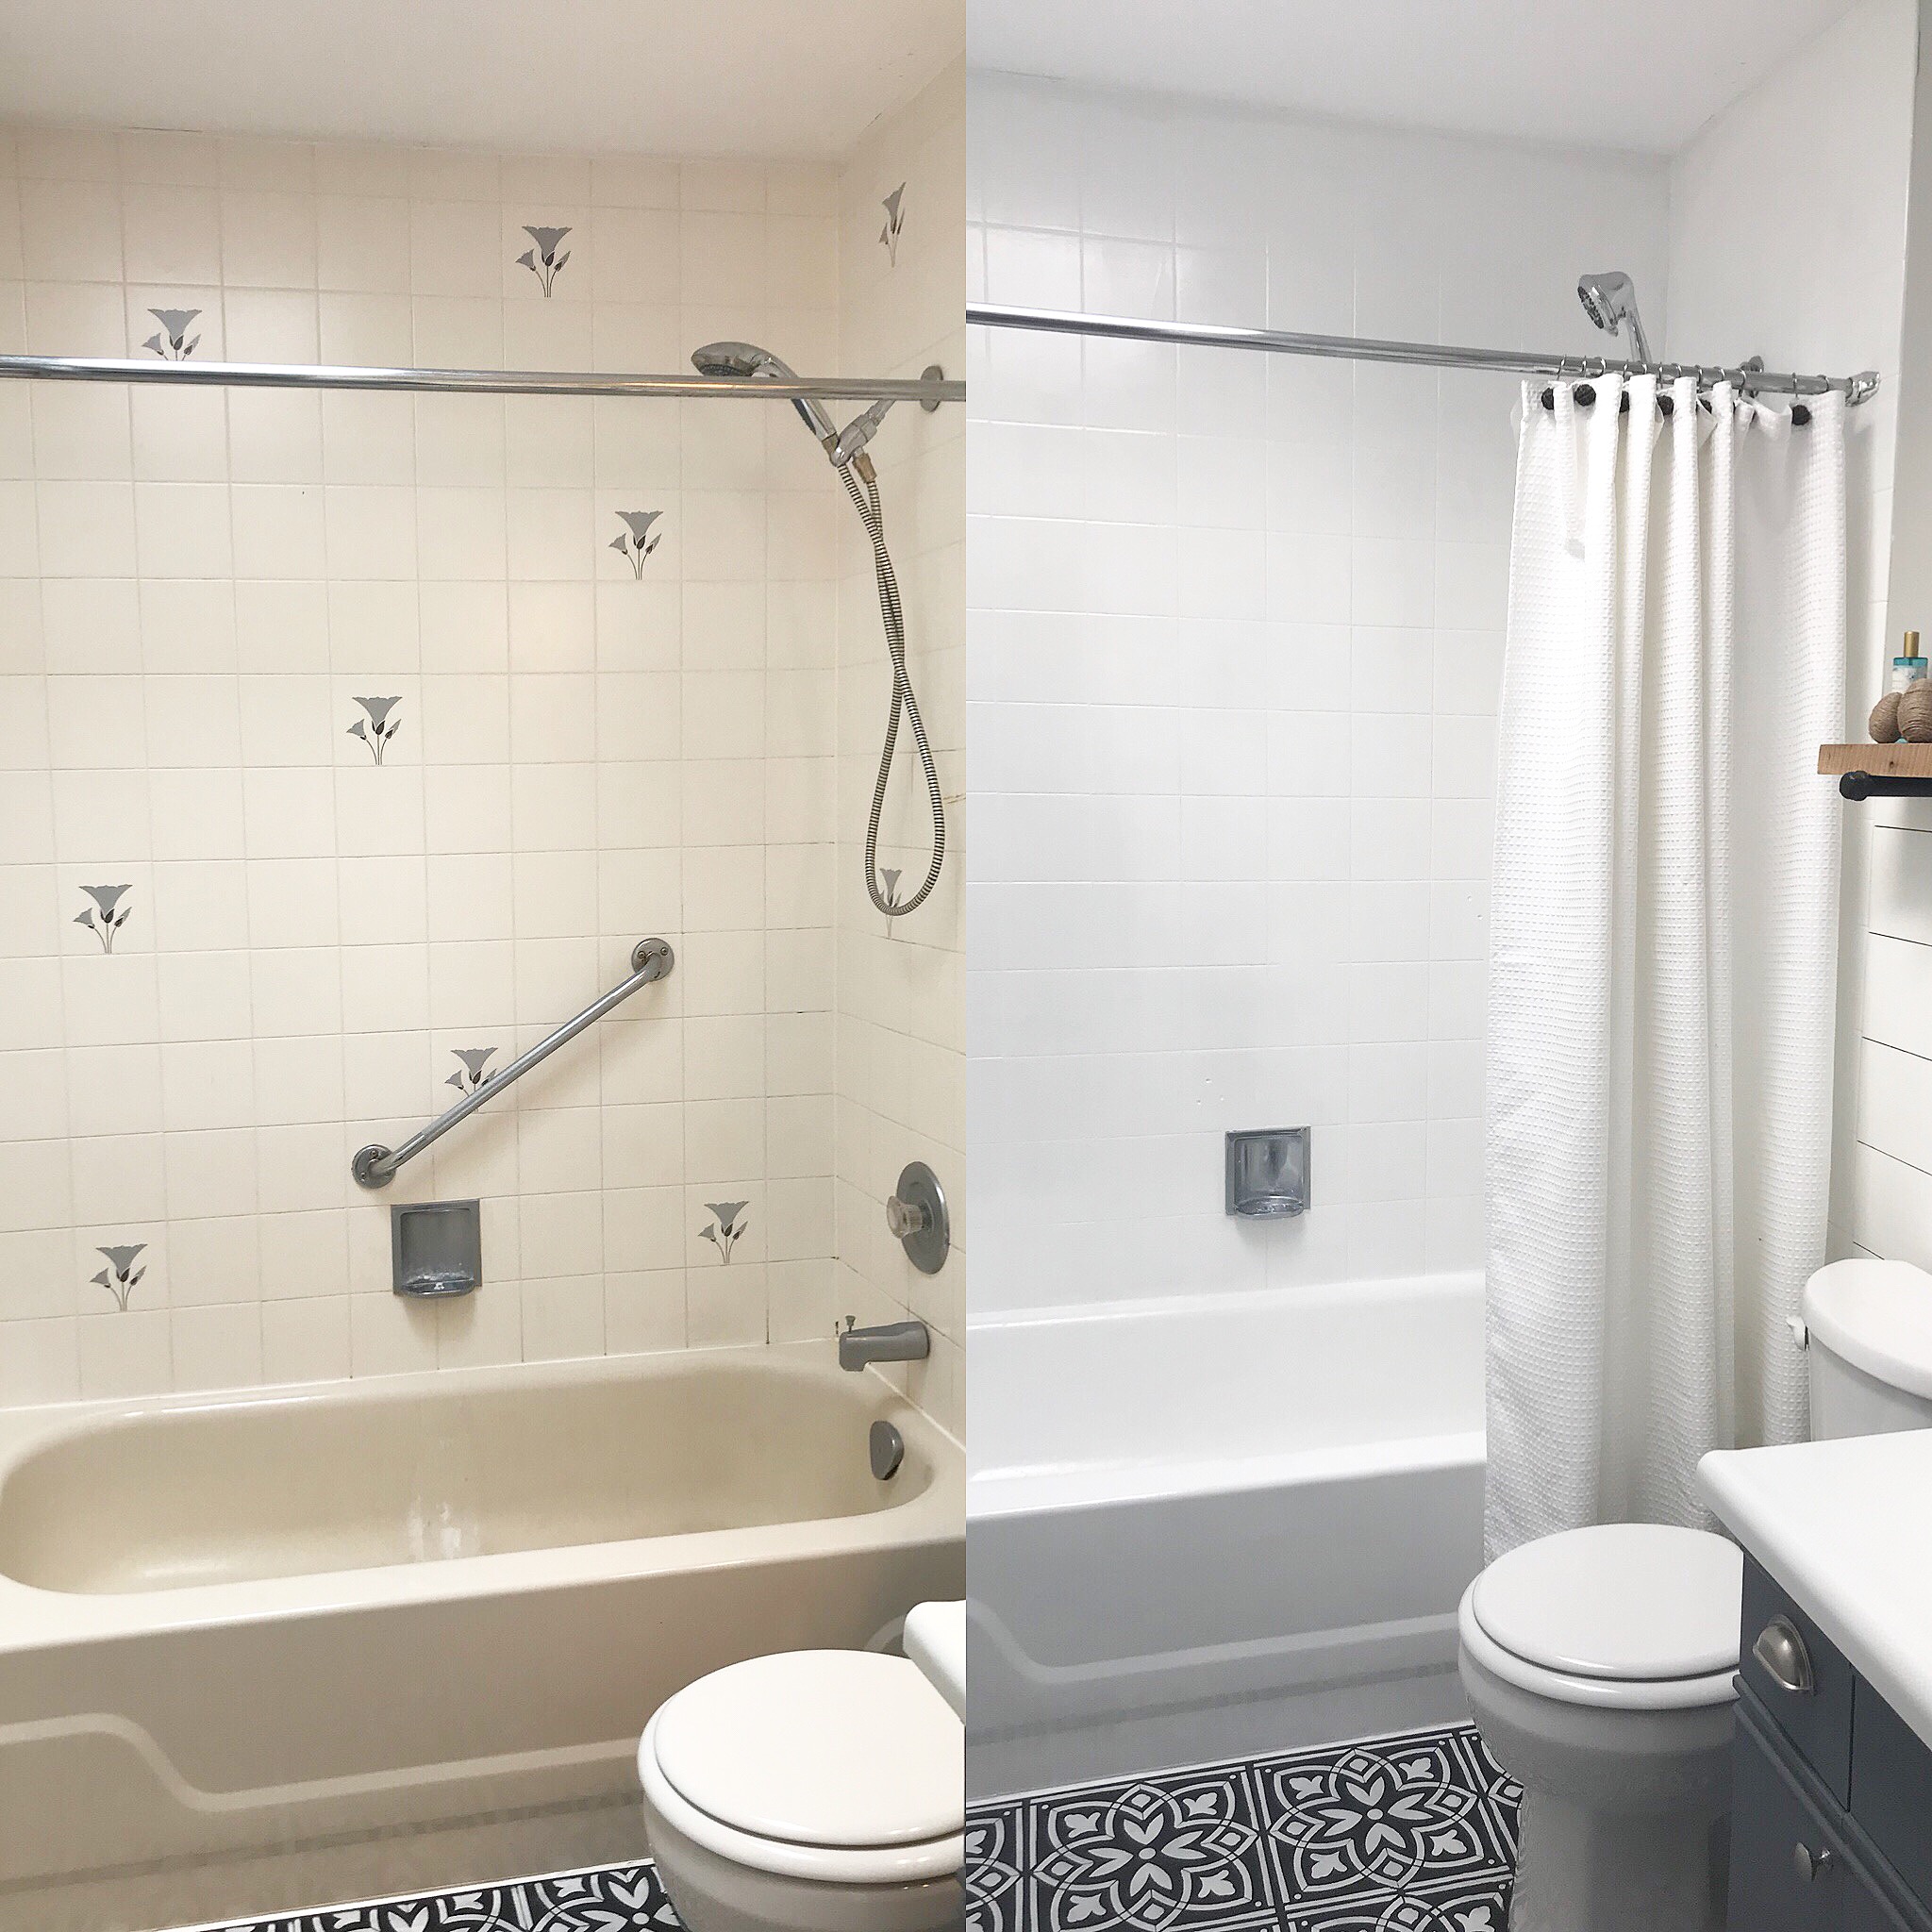 Refinished Bathroom Tub Tile The, How To Refinish A Bathtub With Rustoleum Tub And Tile Kit